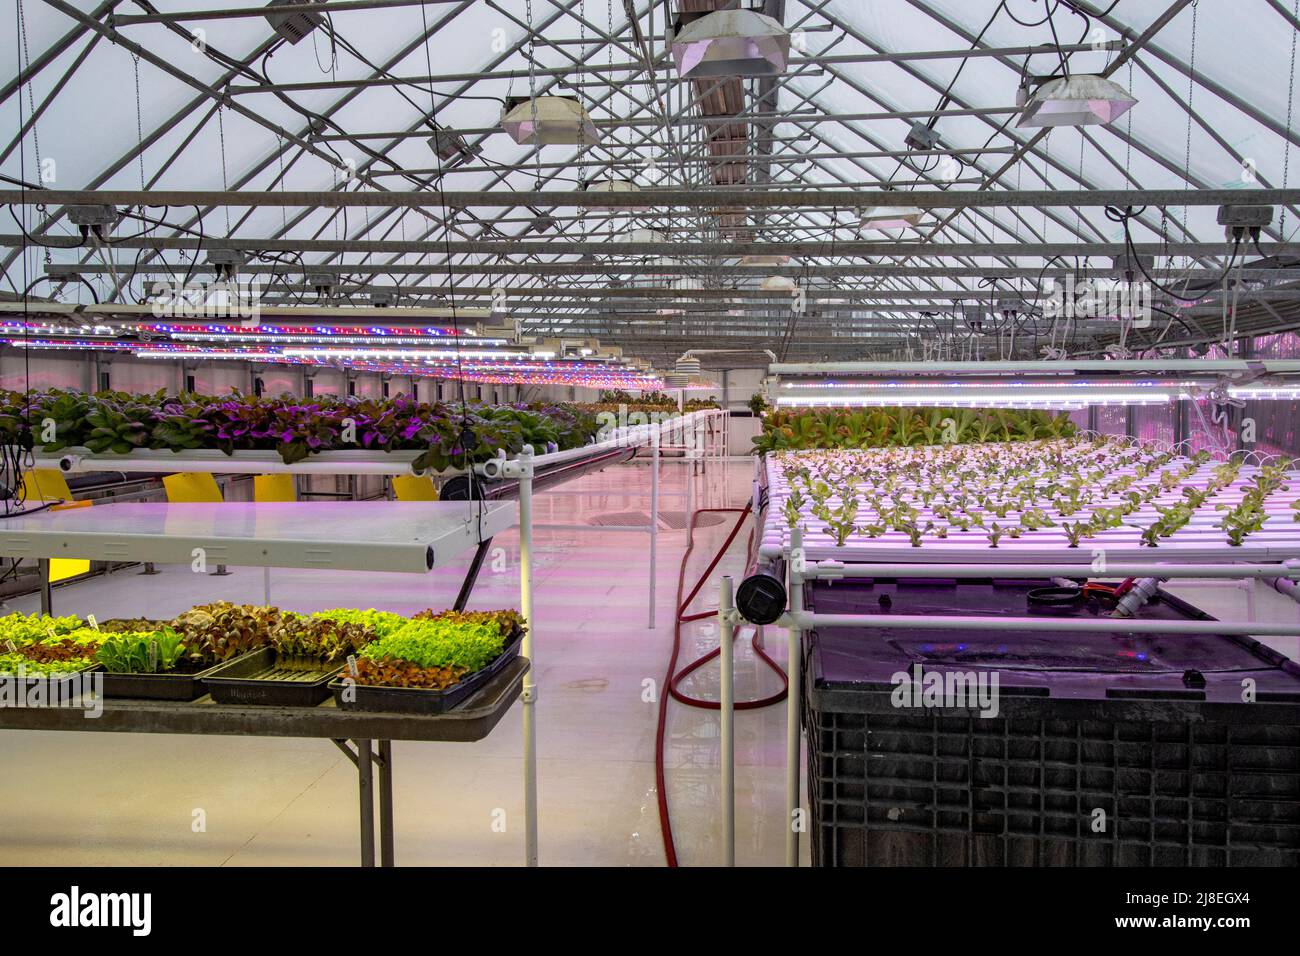 Greenhouse grows vegetables for staff at Chena Hot Springs Resort outside Fairbanks, AK. Stock Photo